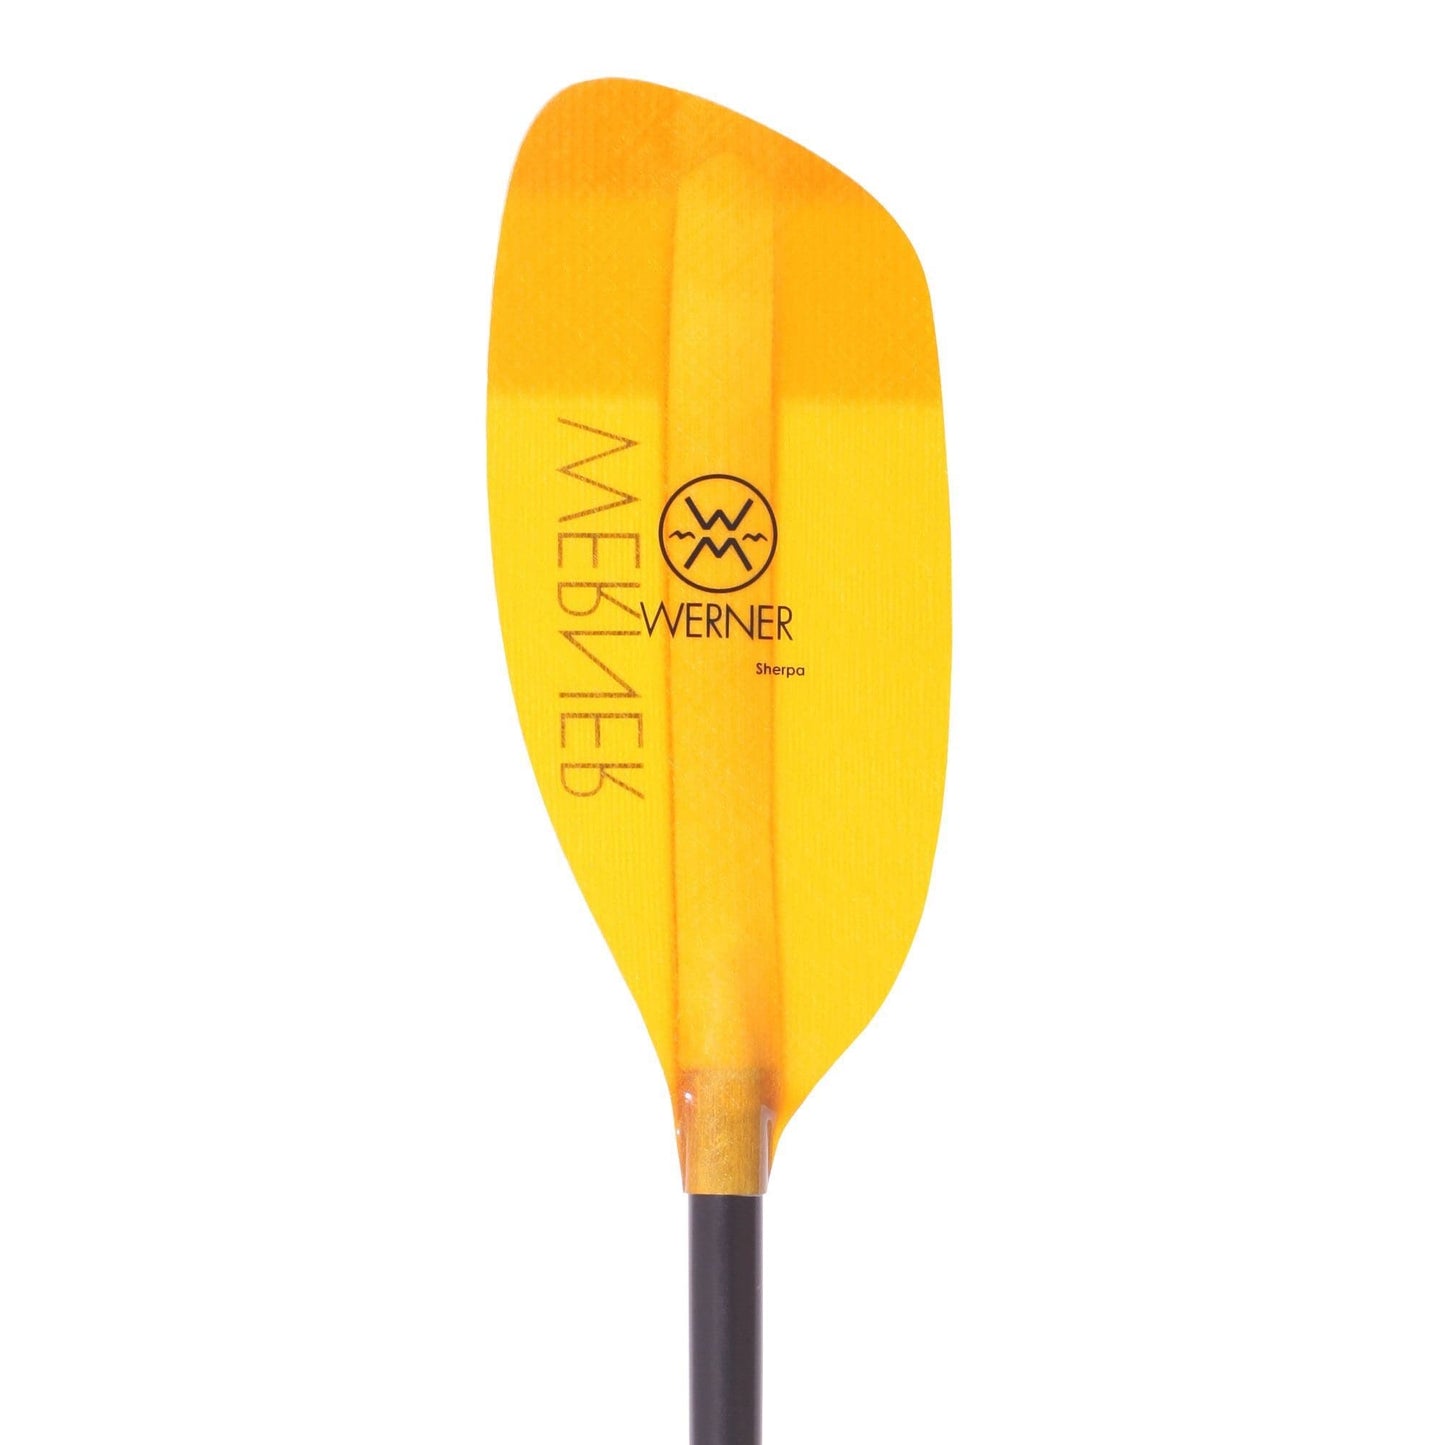 Featuring the Sherpa 2-Piece Kayak Paddle breakdown paddle, fiberglass whitewater paddle, hand paddle, ik paddle, pack raft paddle manufactured by Werner shown here from a third angle.